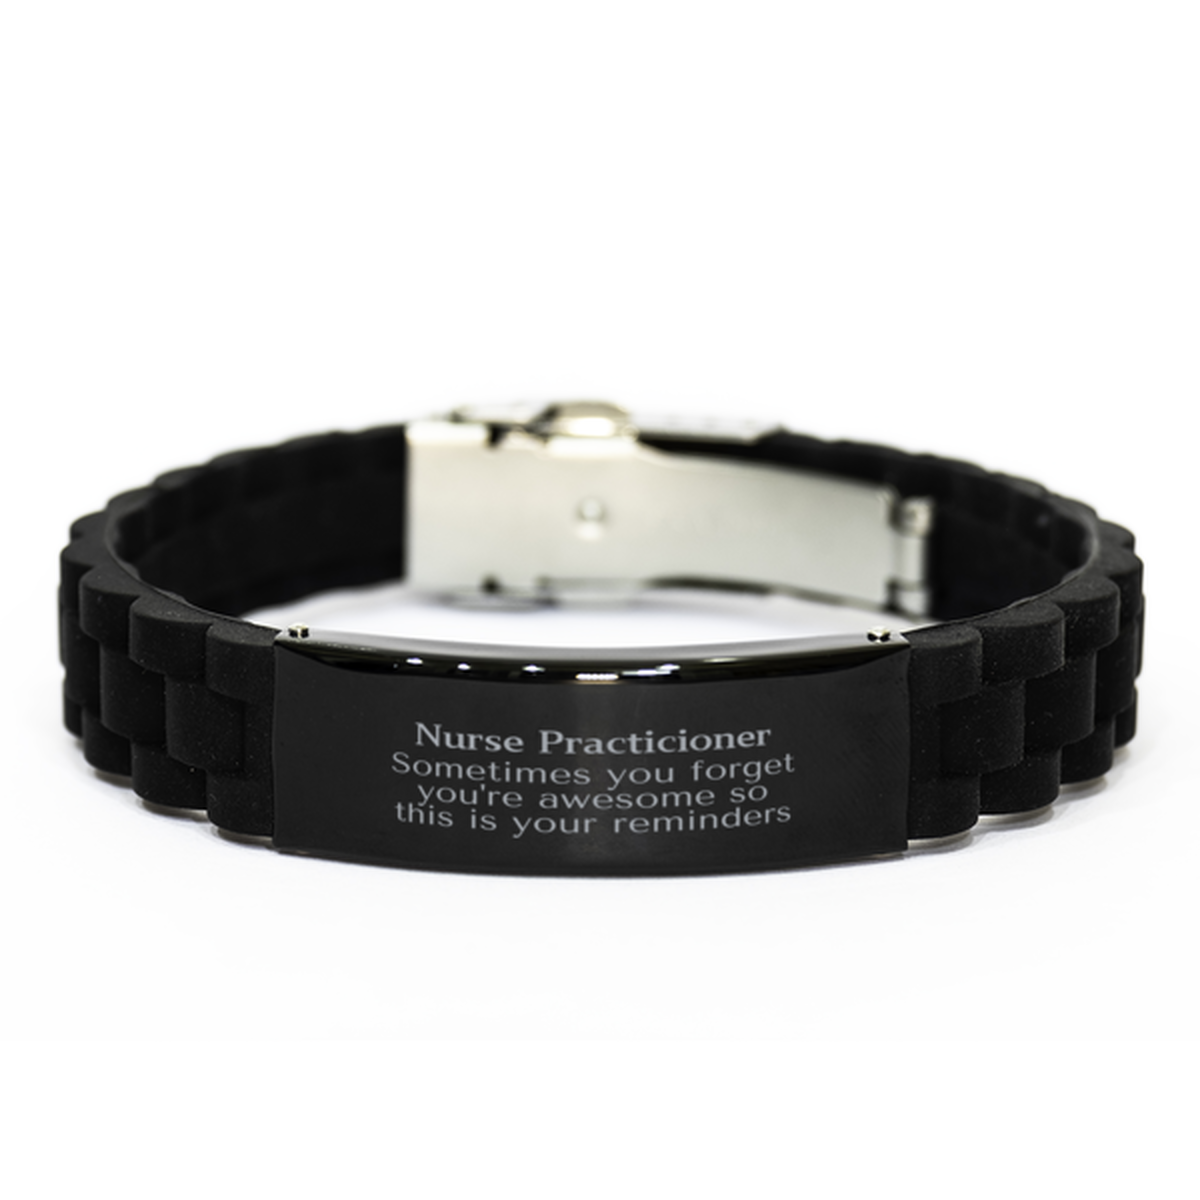 Sentimental Nurse Practicioner Black Glidelock Clasp Bracelet, Nurse Practicioner Sometimes you forget you're awesome so this is your reminders, Graduation Christmas Birthday Gifts for Nurse Practicioner, Men, Women, Coworkers